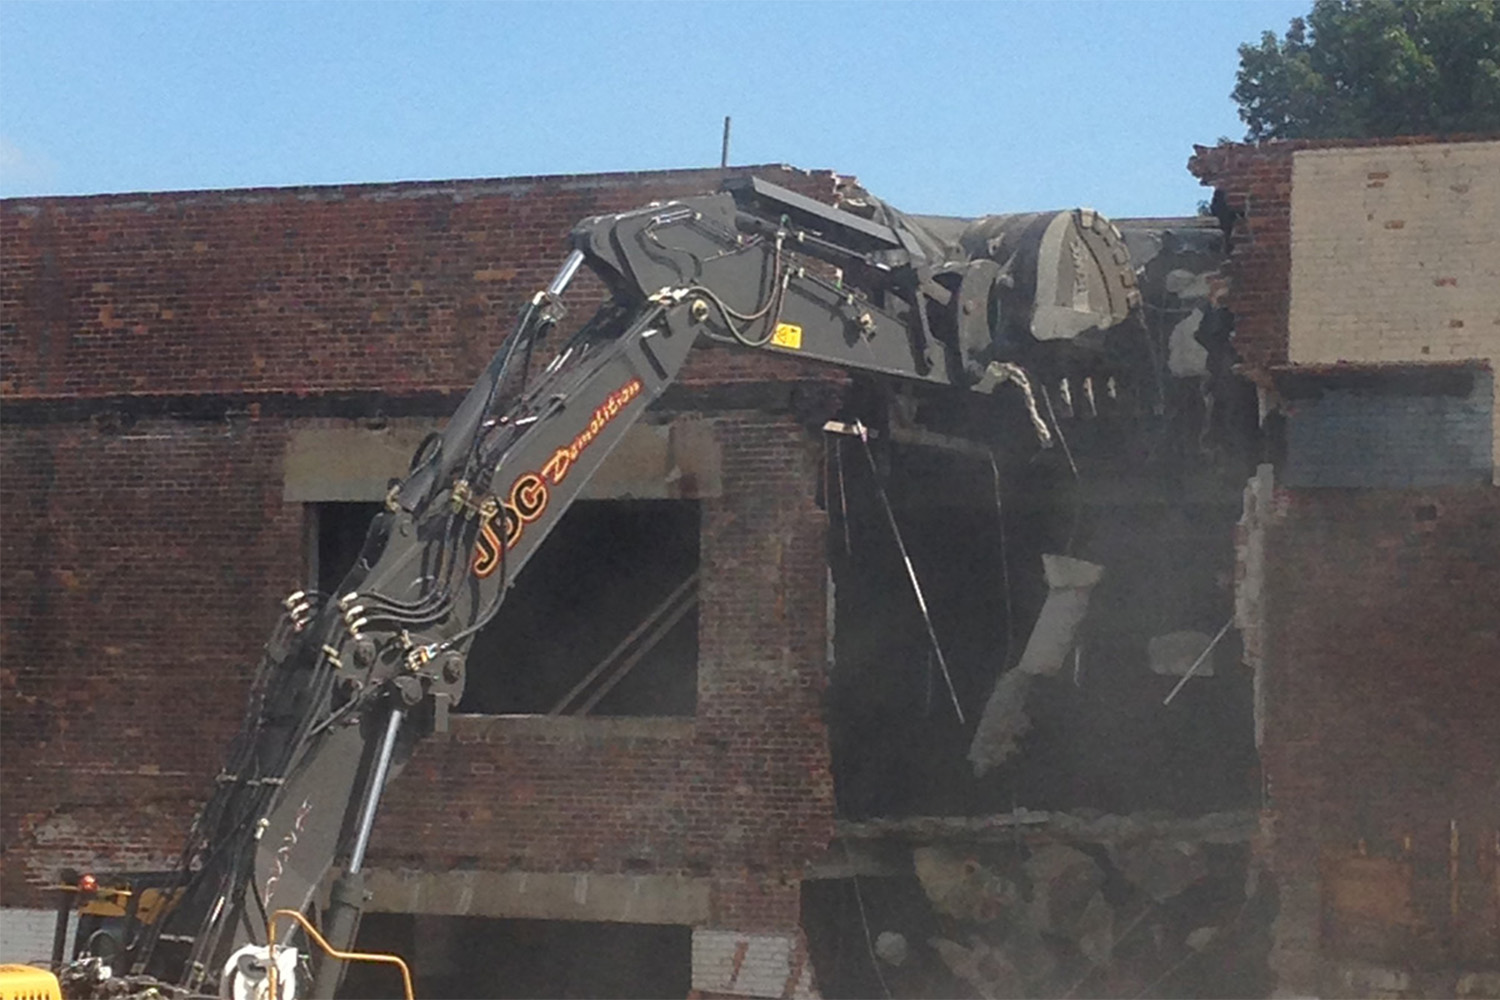 an excavator tearing down the building brick by brick.